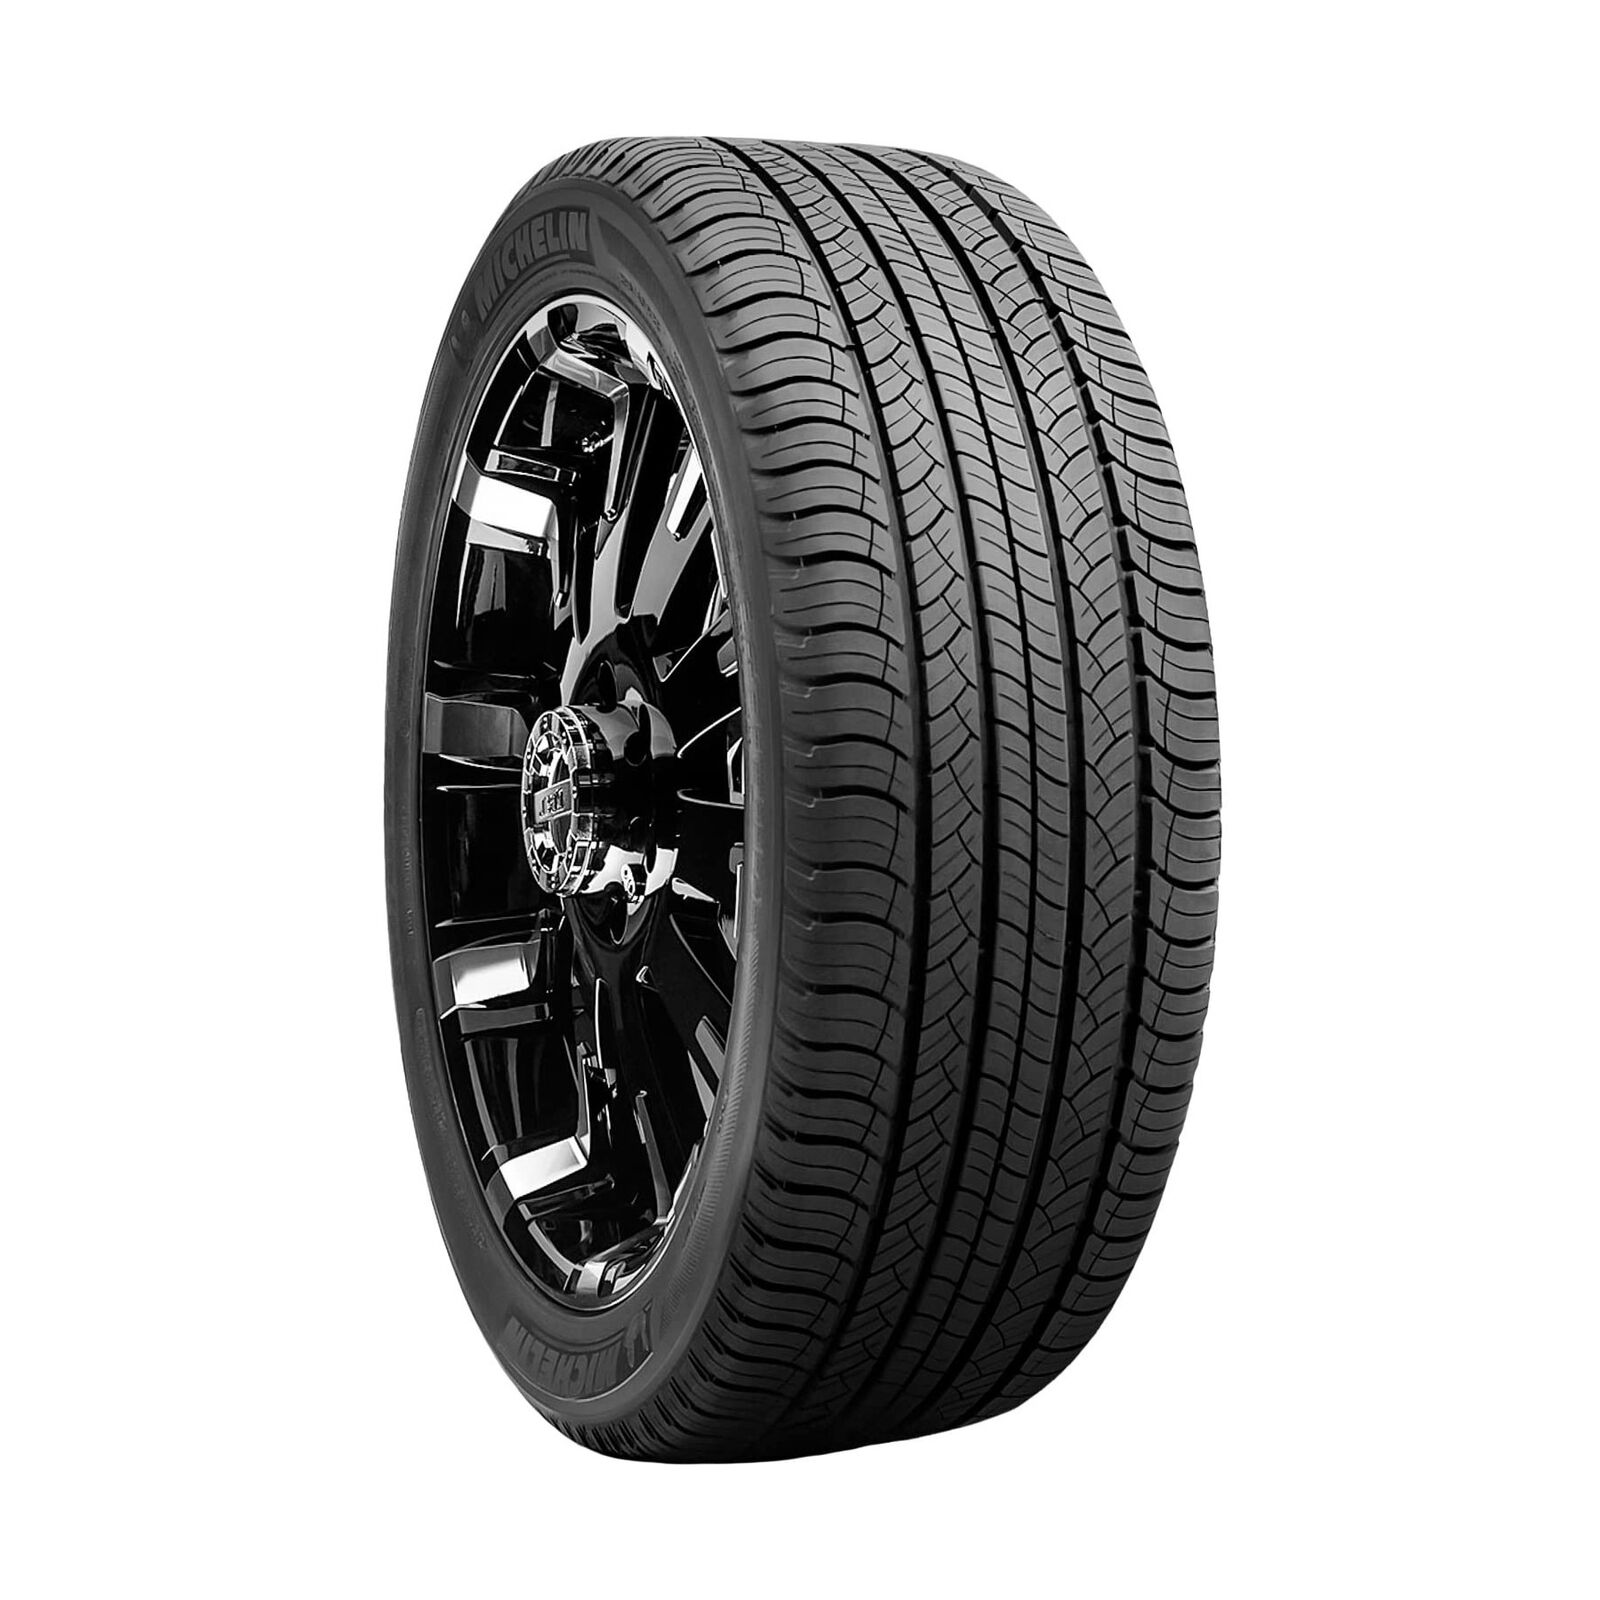 MICHELIN Latitude Tour HP All Season Radial Car Tire for SUVs and Crossovers,...